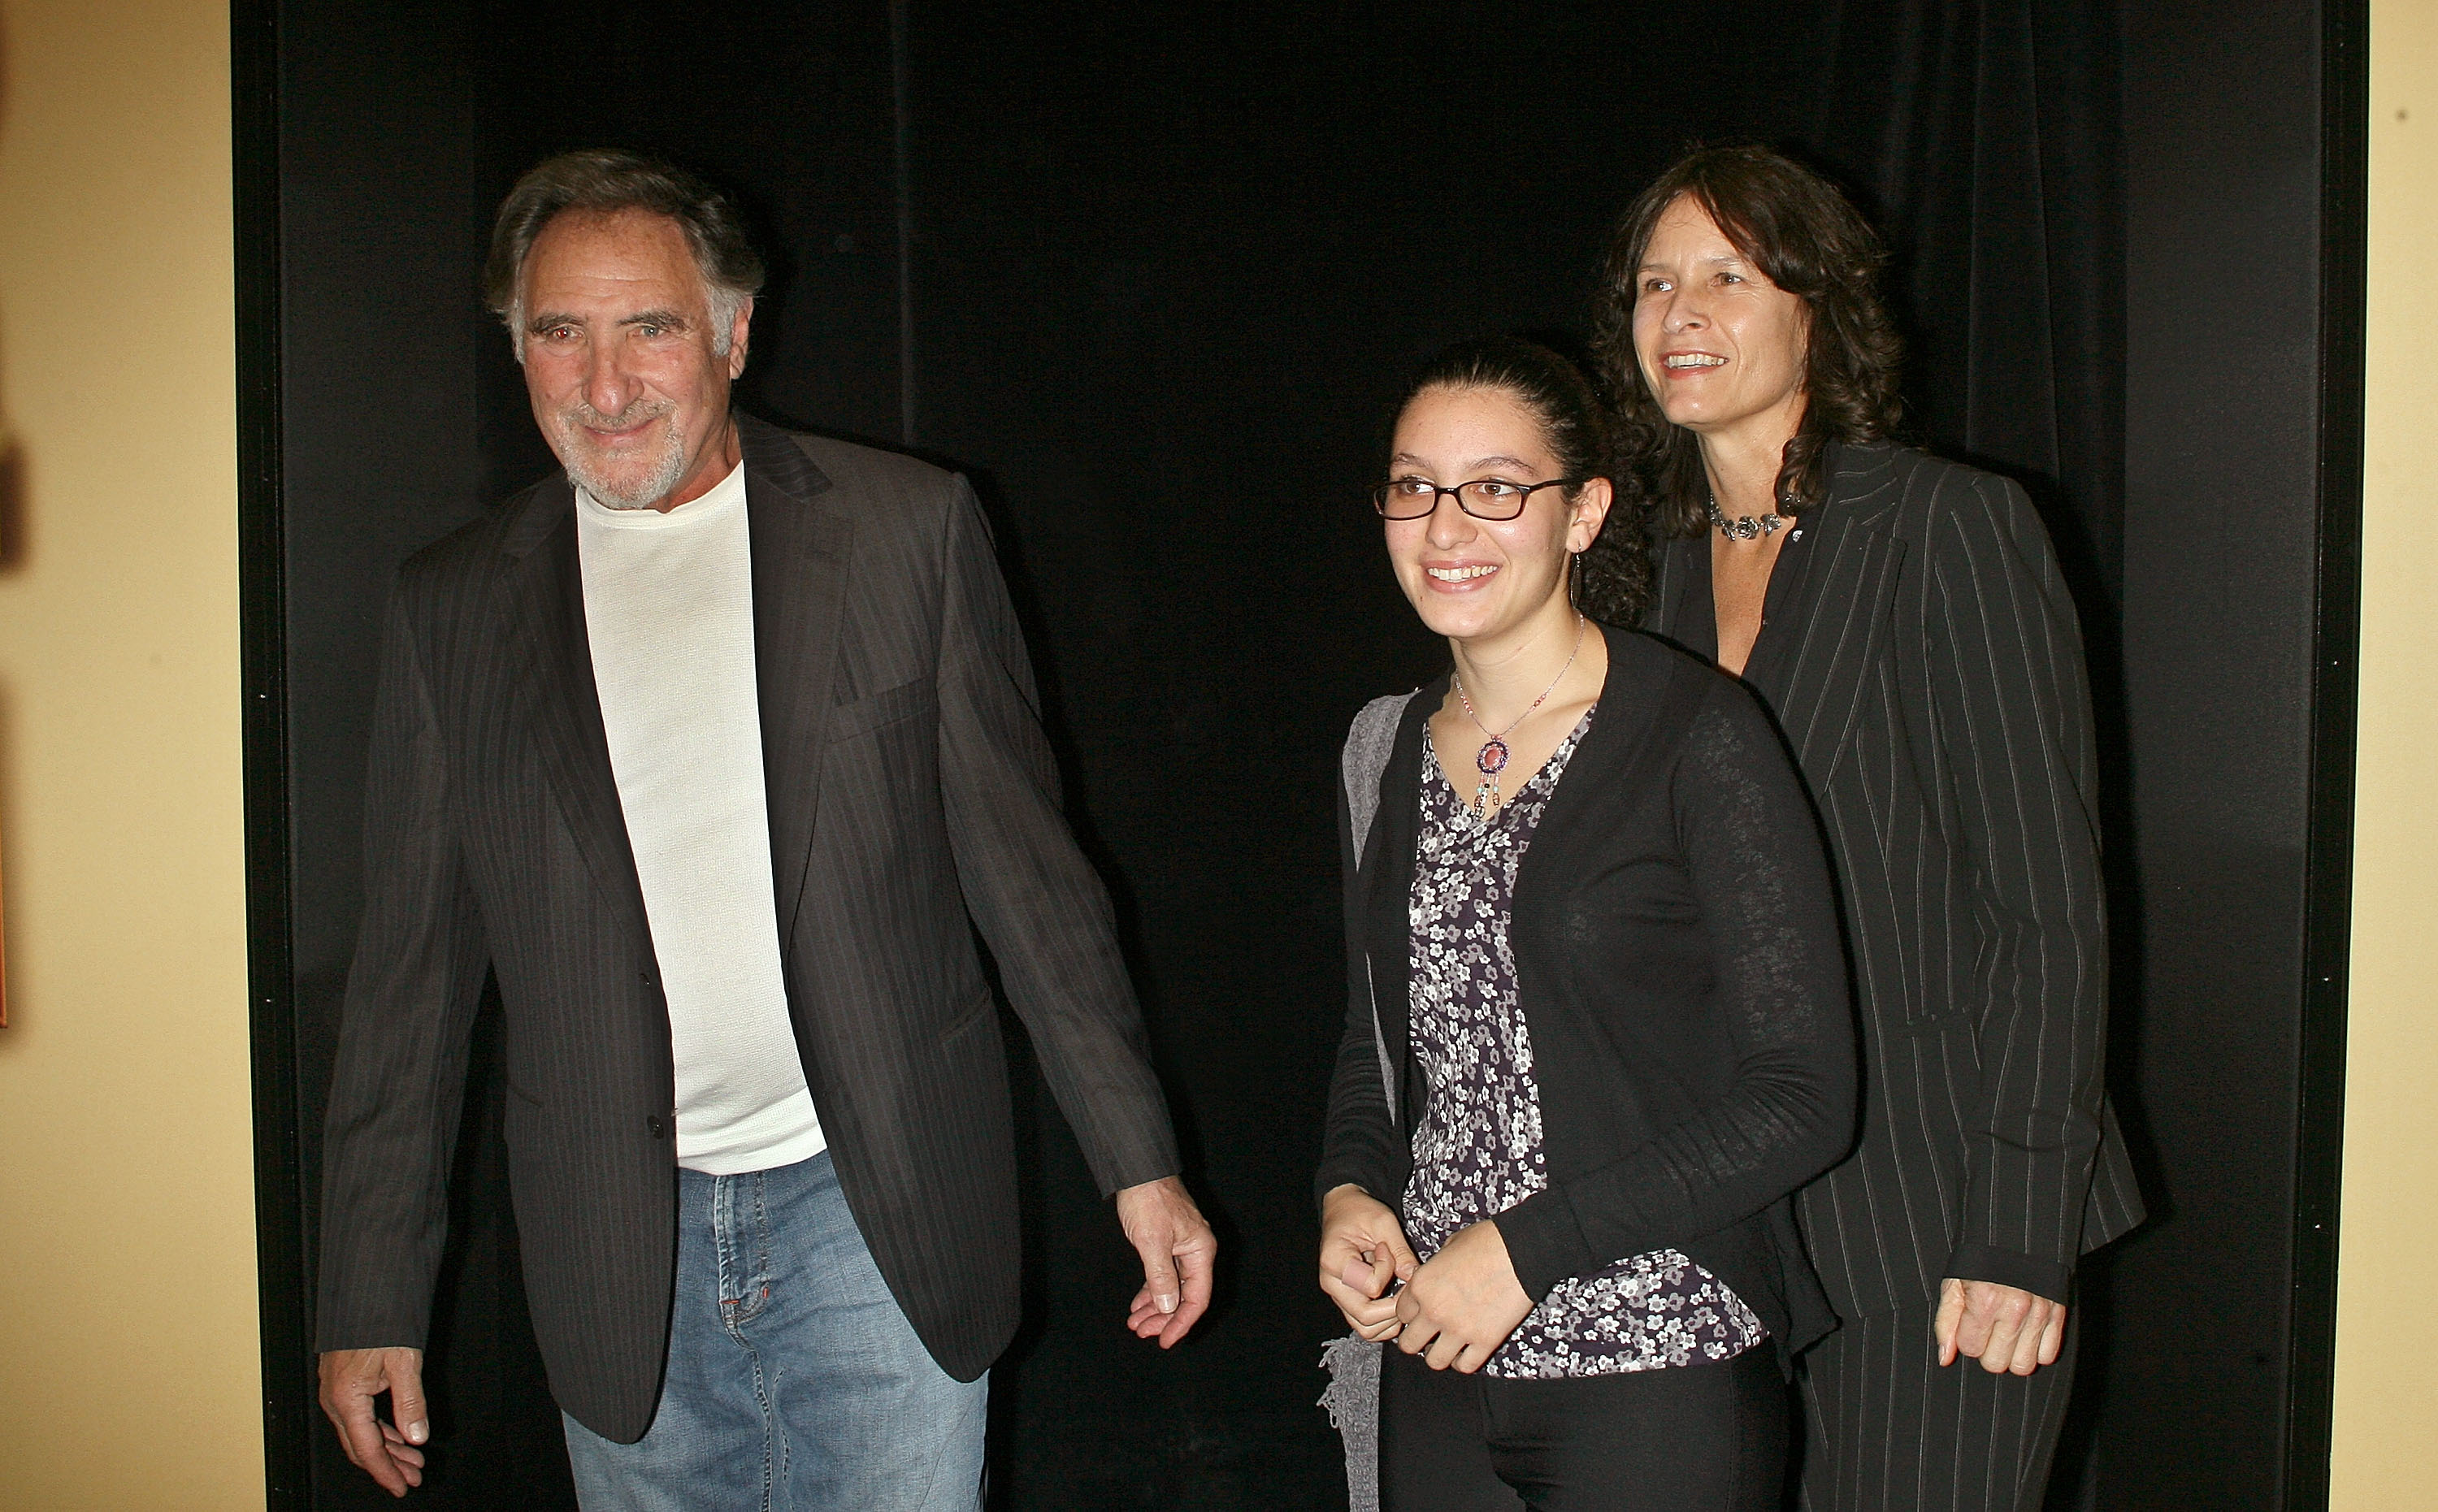 Judd Hirsch and family at the "Tower Heist' world premiere in October 2011 | Source: Getty Images